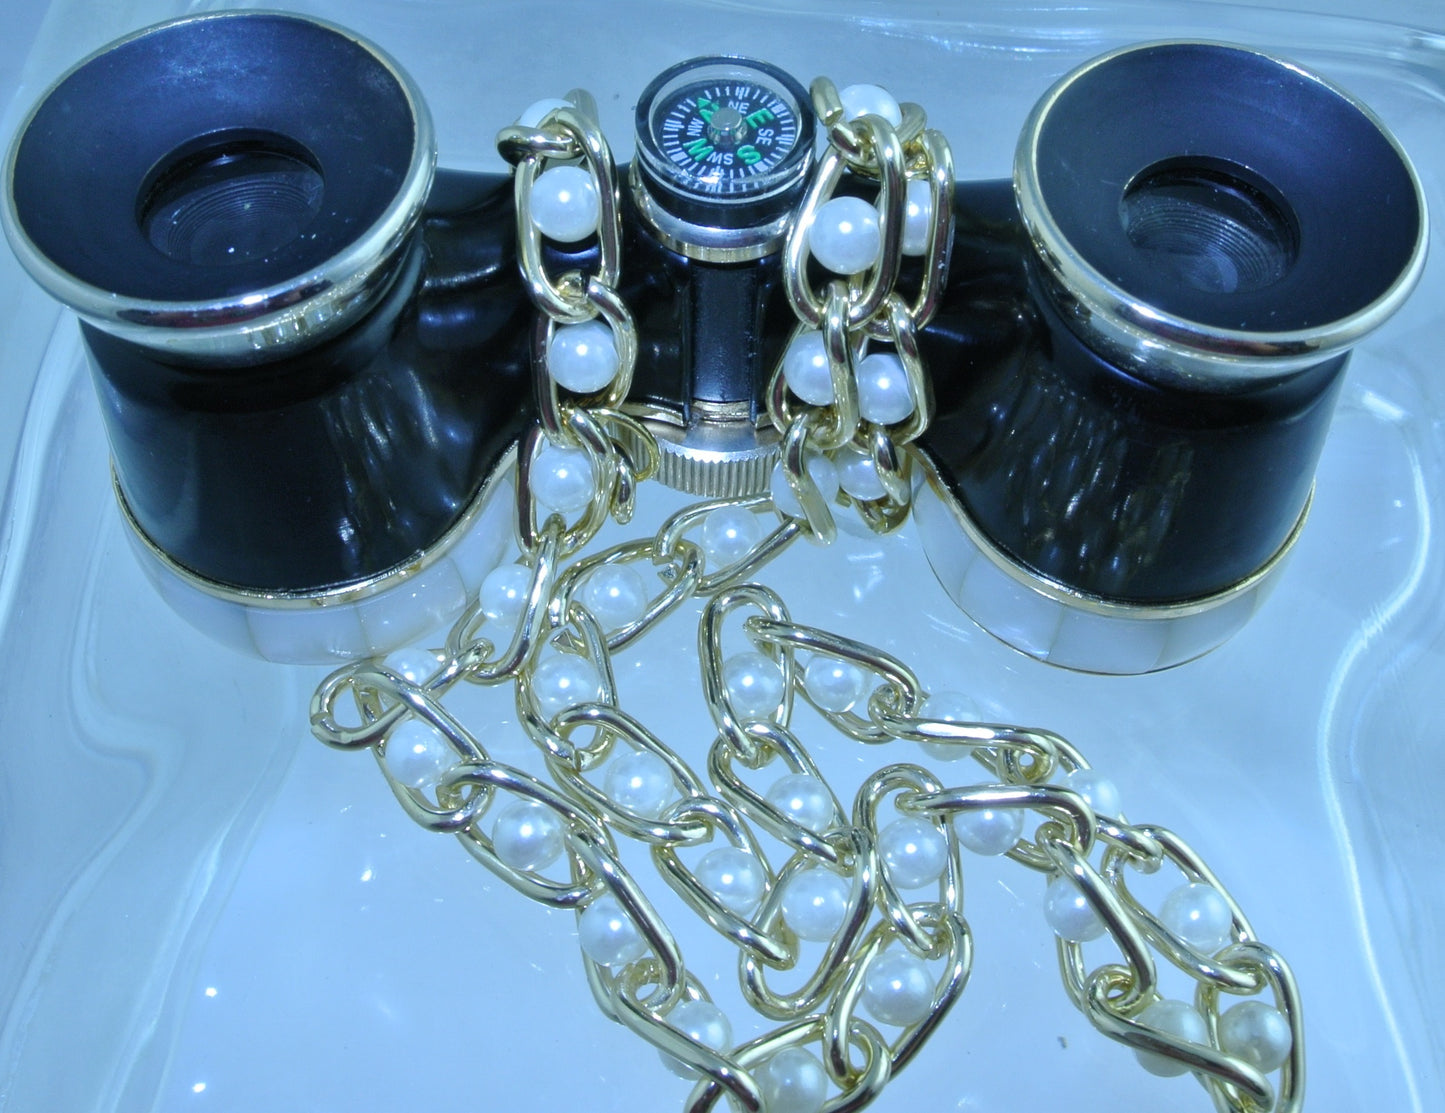 VINTAGE BLACK ABALONE MOTHER OF PEARL MOP SELSI COMPASS GOLD PEARL CHAIN BINOCULARS OPERA GLASSES STARR WILDE STEAMPUNK FORTRESS